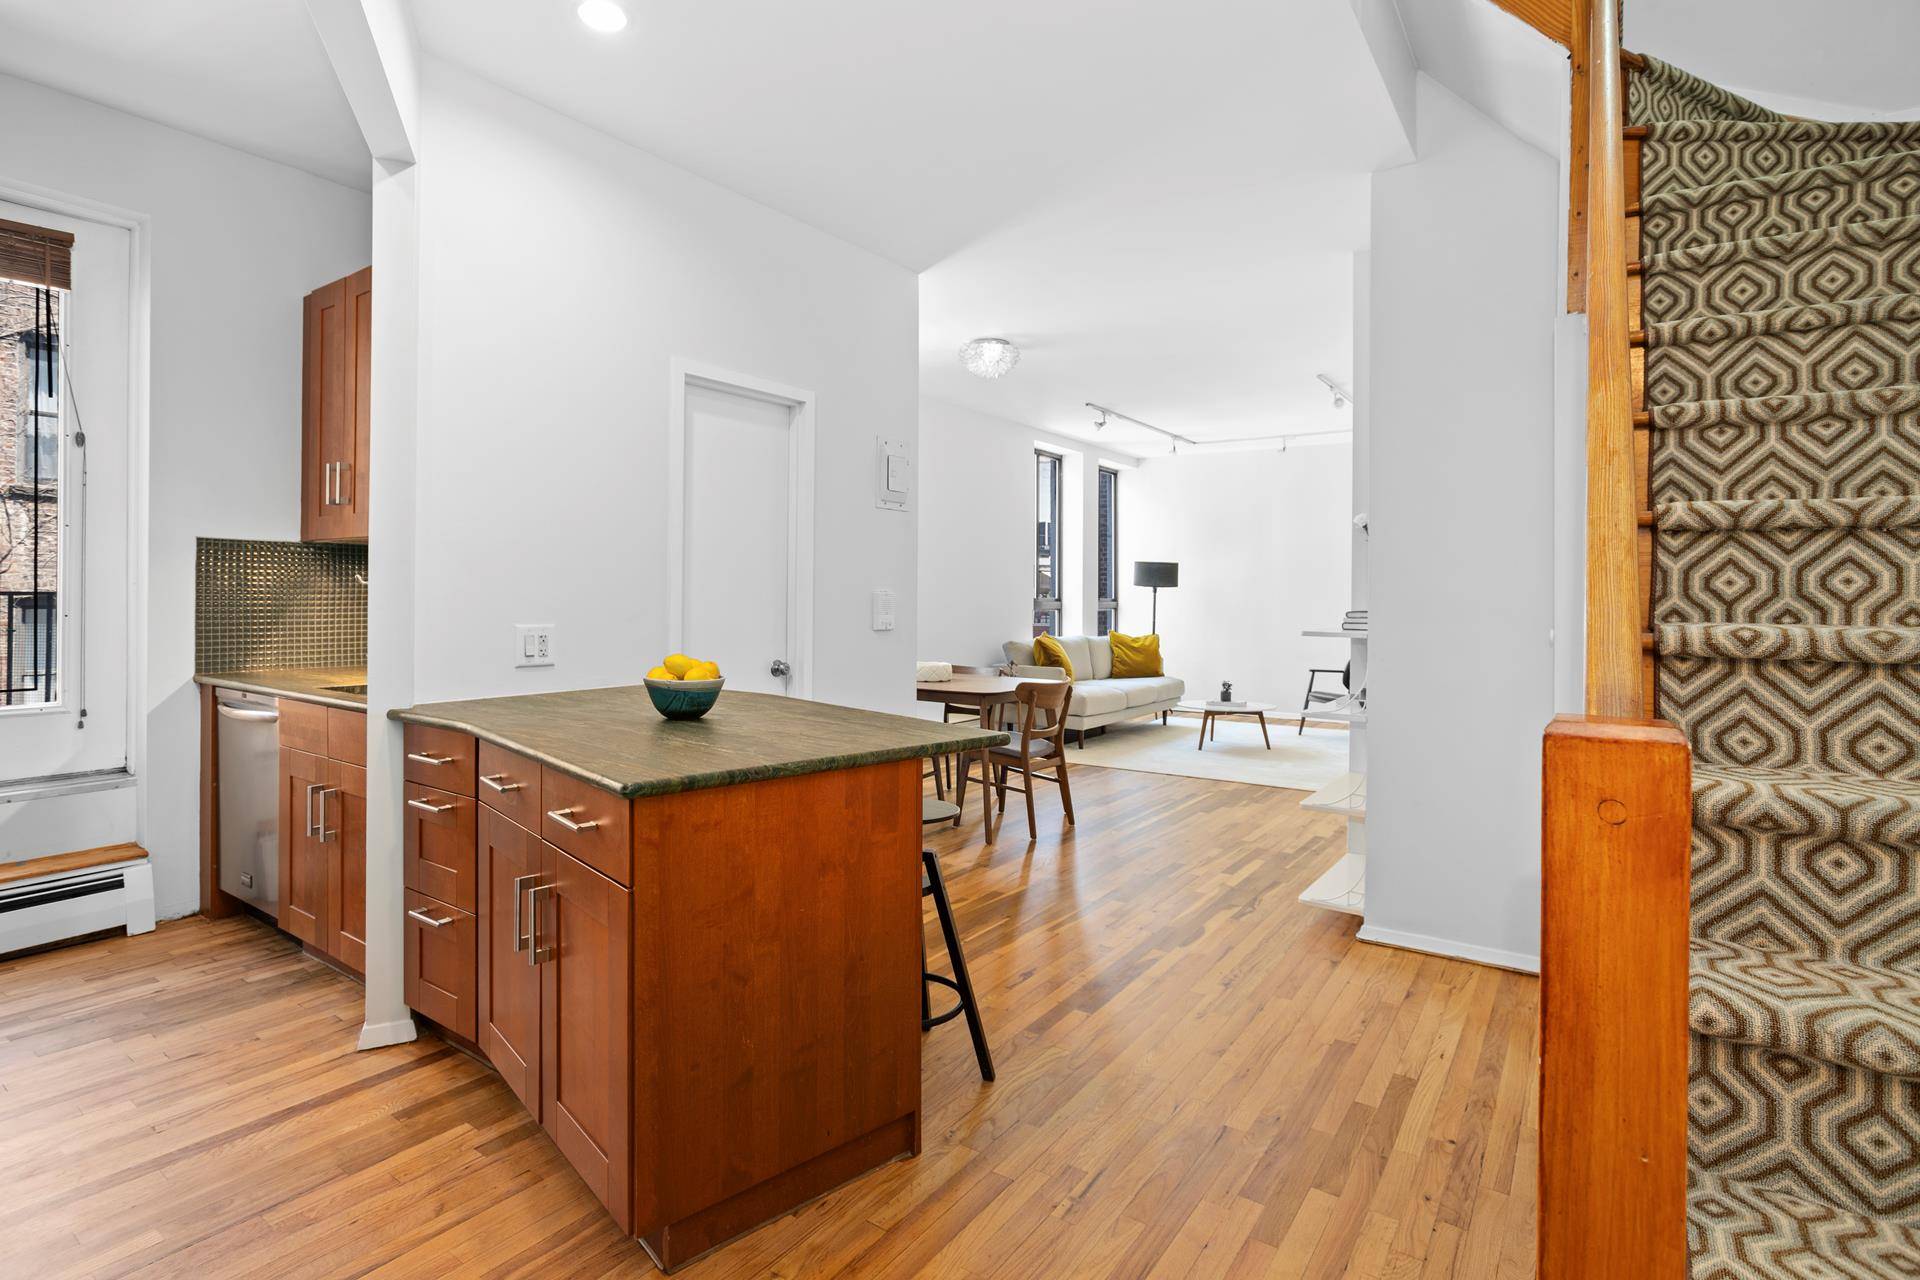 Enjoy duplex loft like living with outdoor space in the heart of Park Slope.